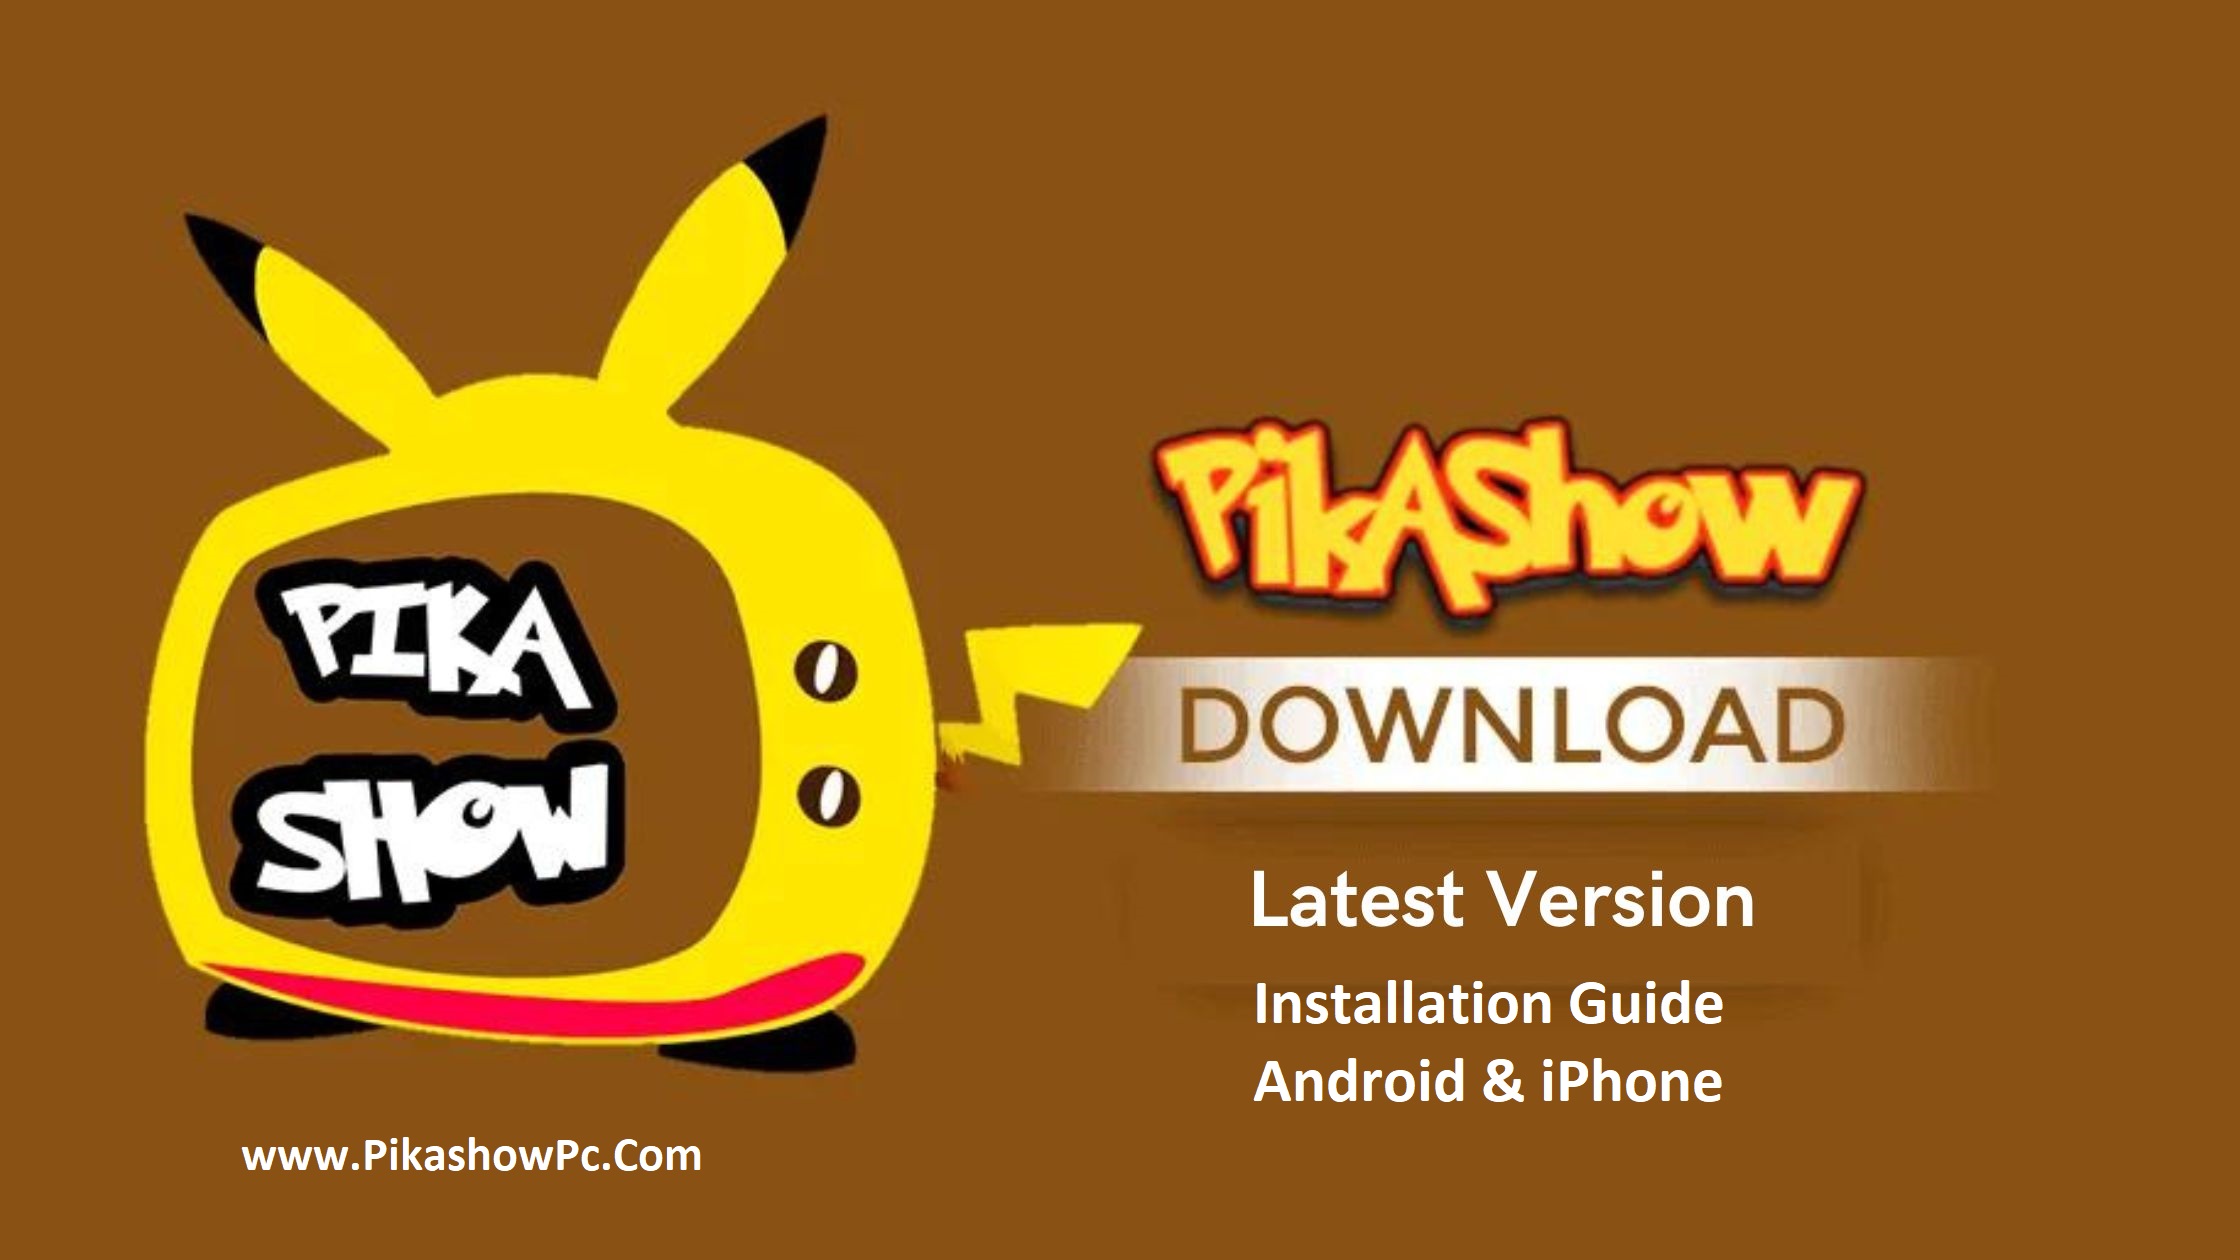 Download & Install Pikashow APK on Mobile - (Android & iPhone)